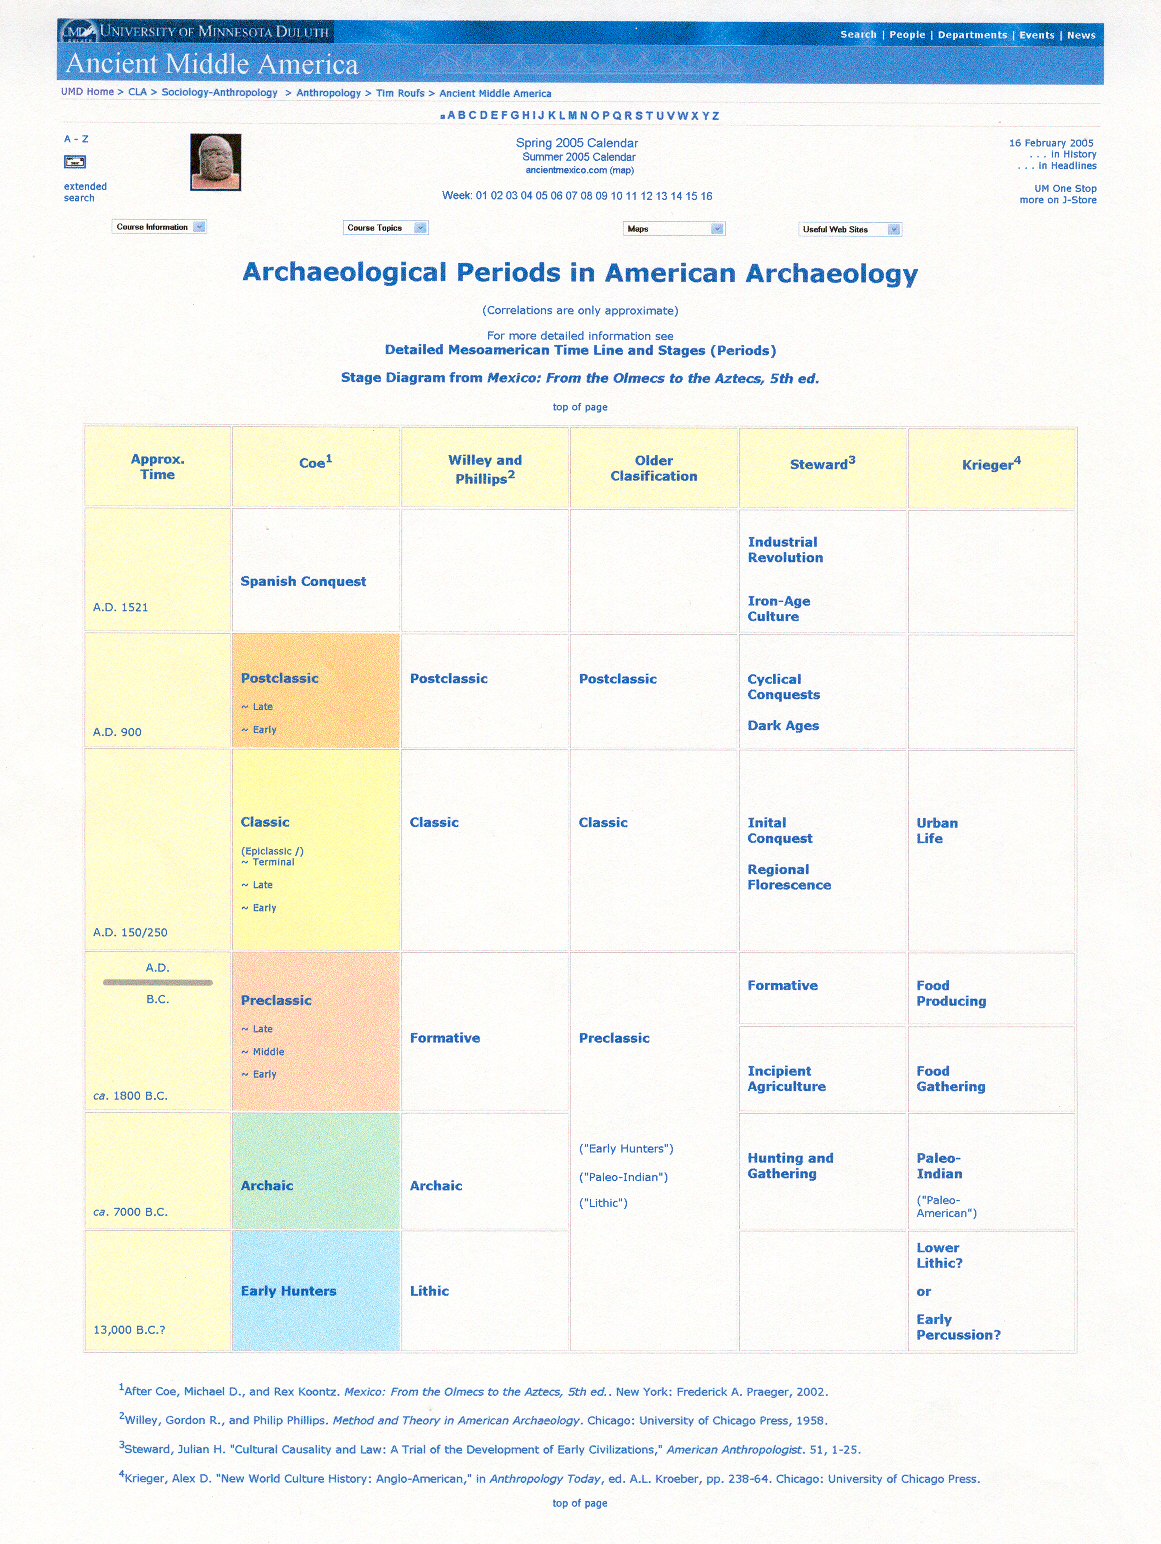 Archaeological Periods in American Archaeology.